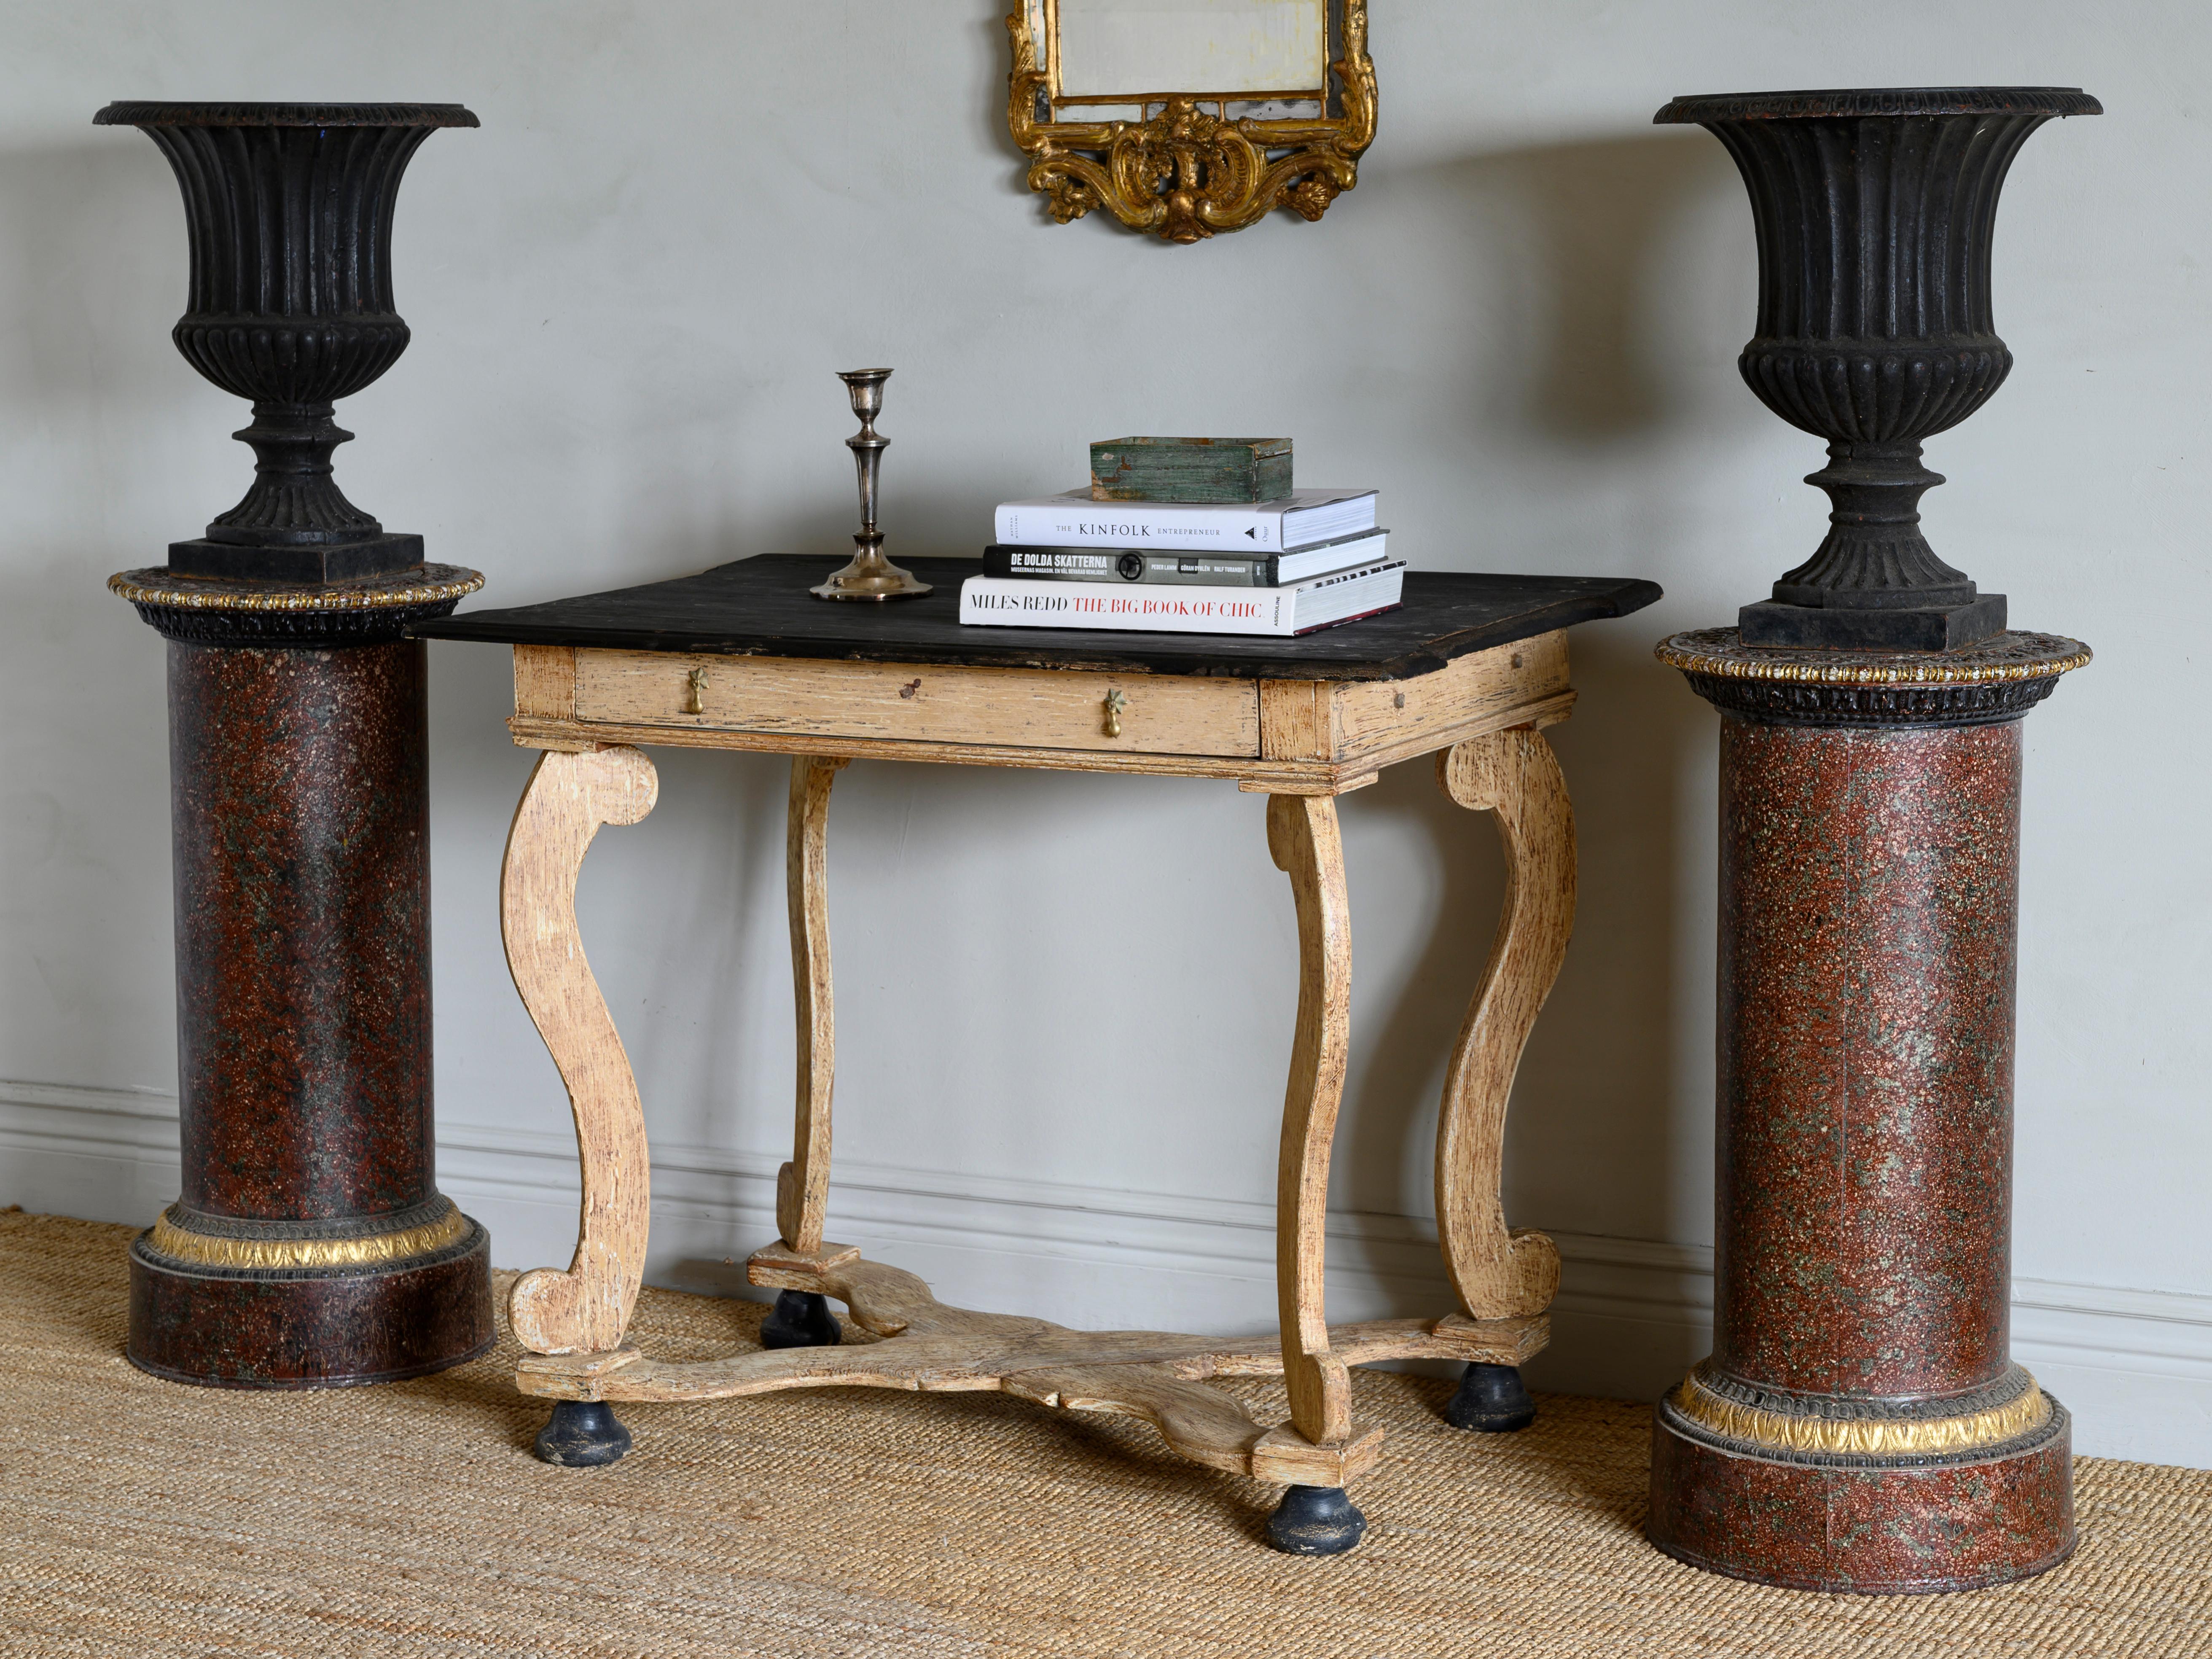 Swedish 18th century Baroque console table with one drawer, circa 1750

Good condition with wear consistent with age and use. Dry scraped to reveal the original finish, top in a secondary color. Structurally good and sturdy.